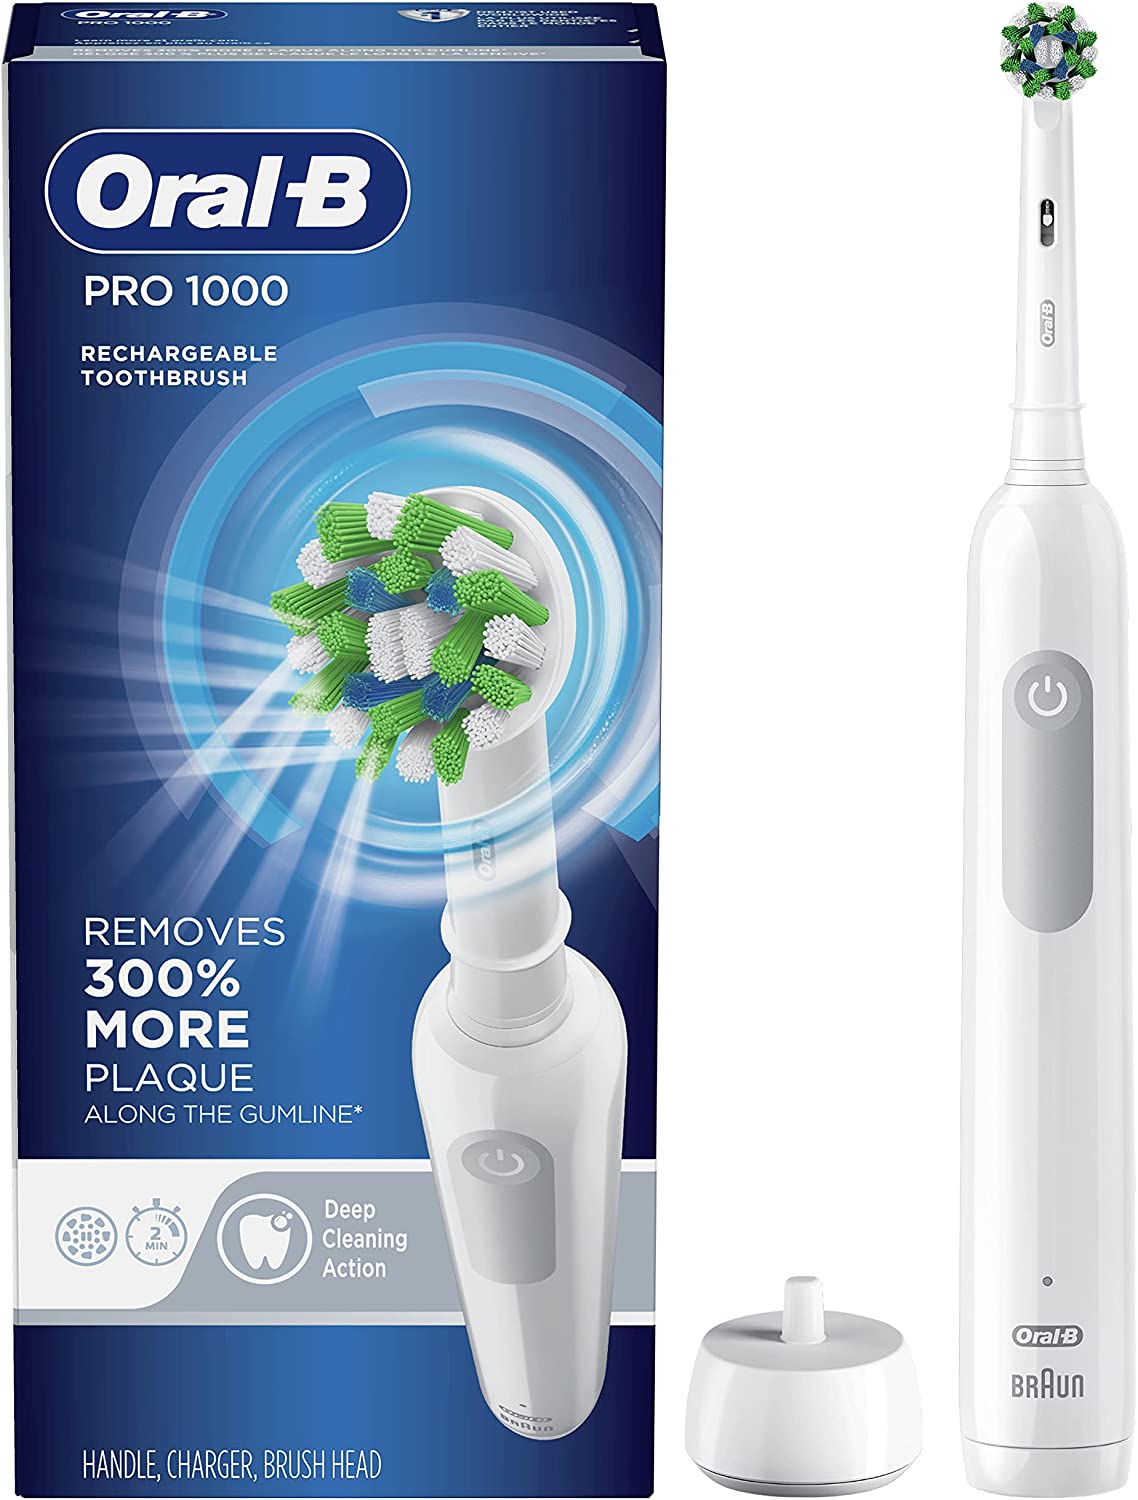 Oral-B Pro 1000 Battery Powered Electric Toothbrush